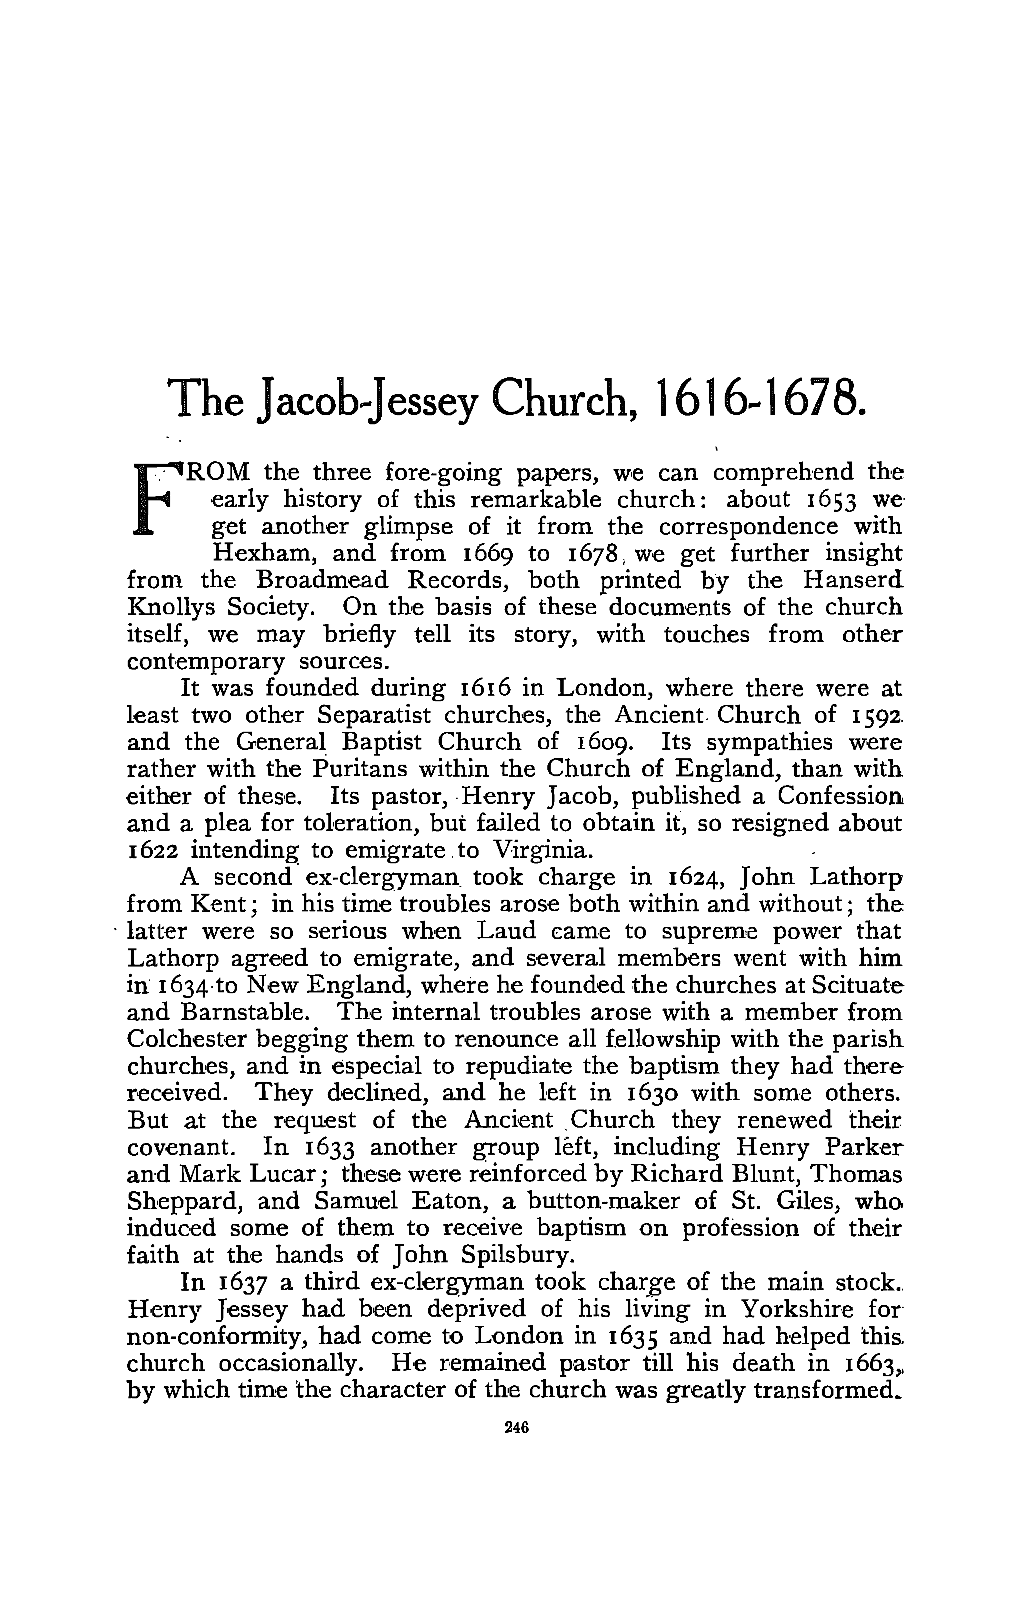 Story of the Jacob-Jessey Church, 1616-1678